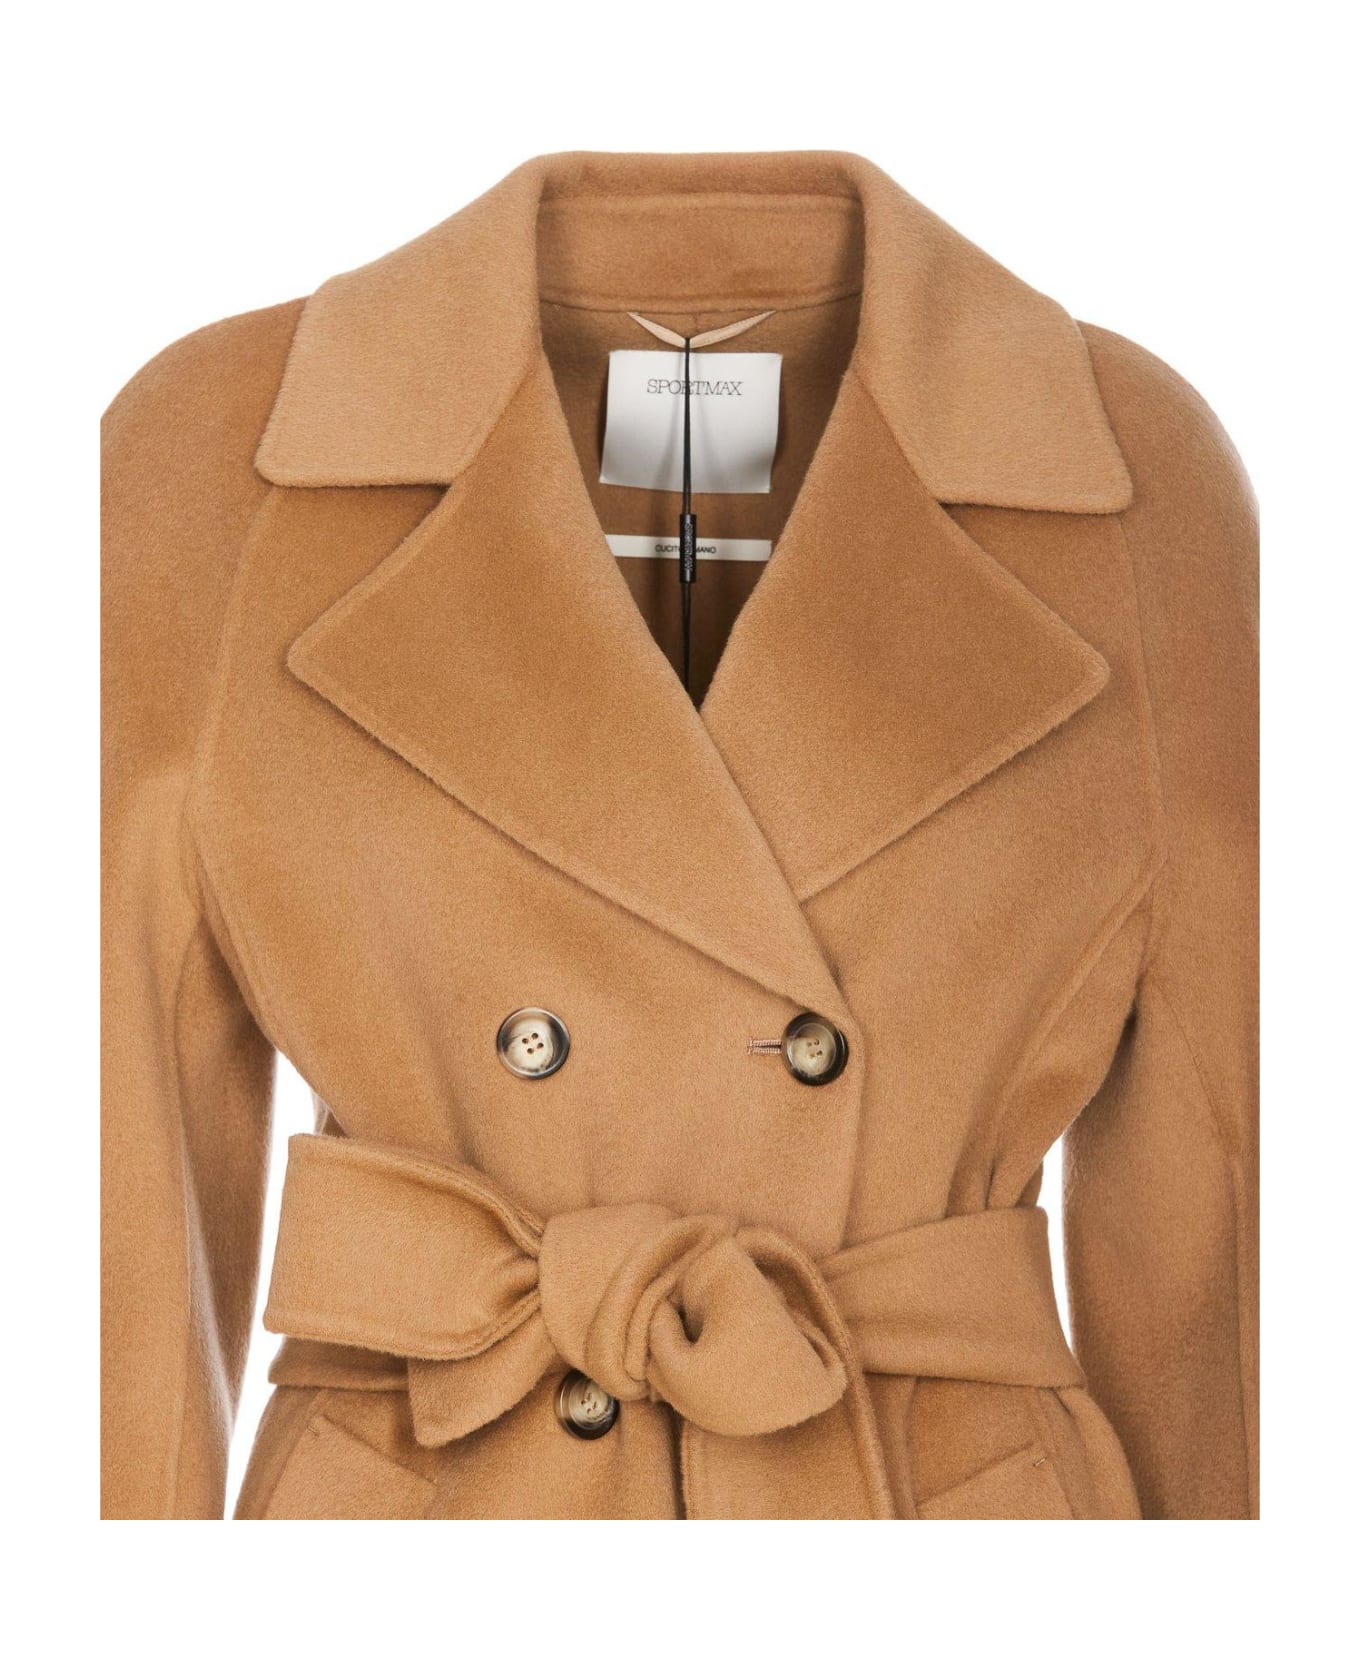 SportMax Double-breasted Belted Coat - Beige